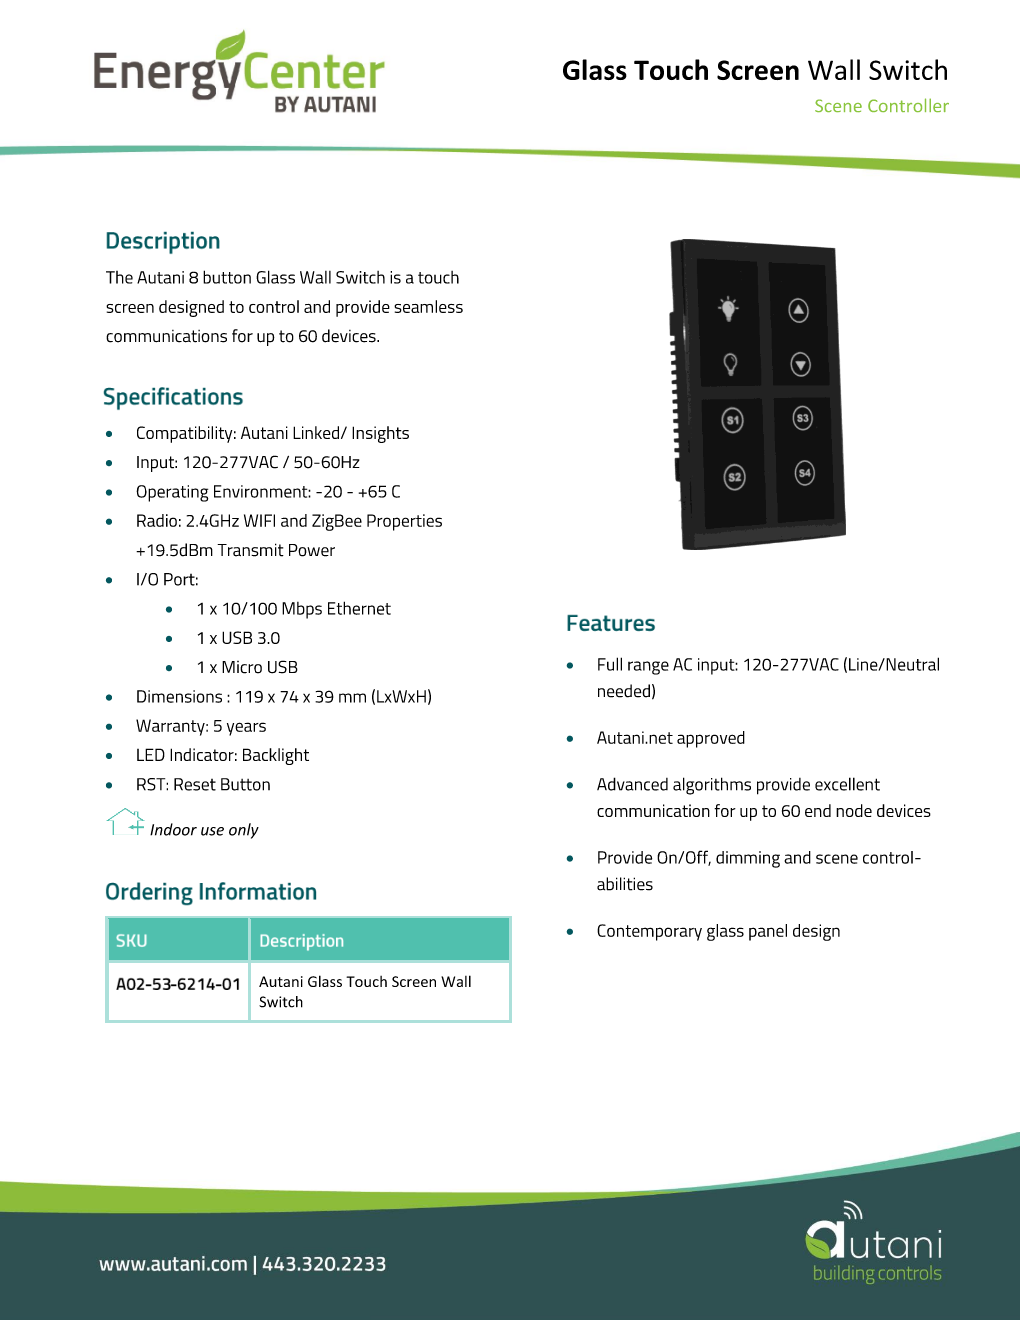 AUTANI_GLASS_TOUCH_SCREEN_WALL_SWITCH_20220830.png